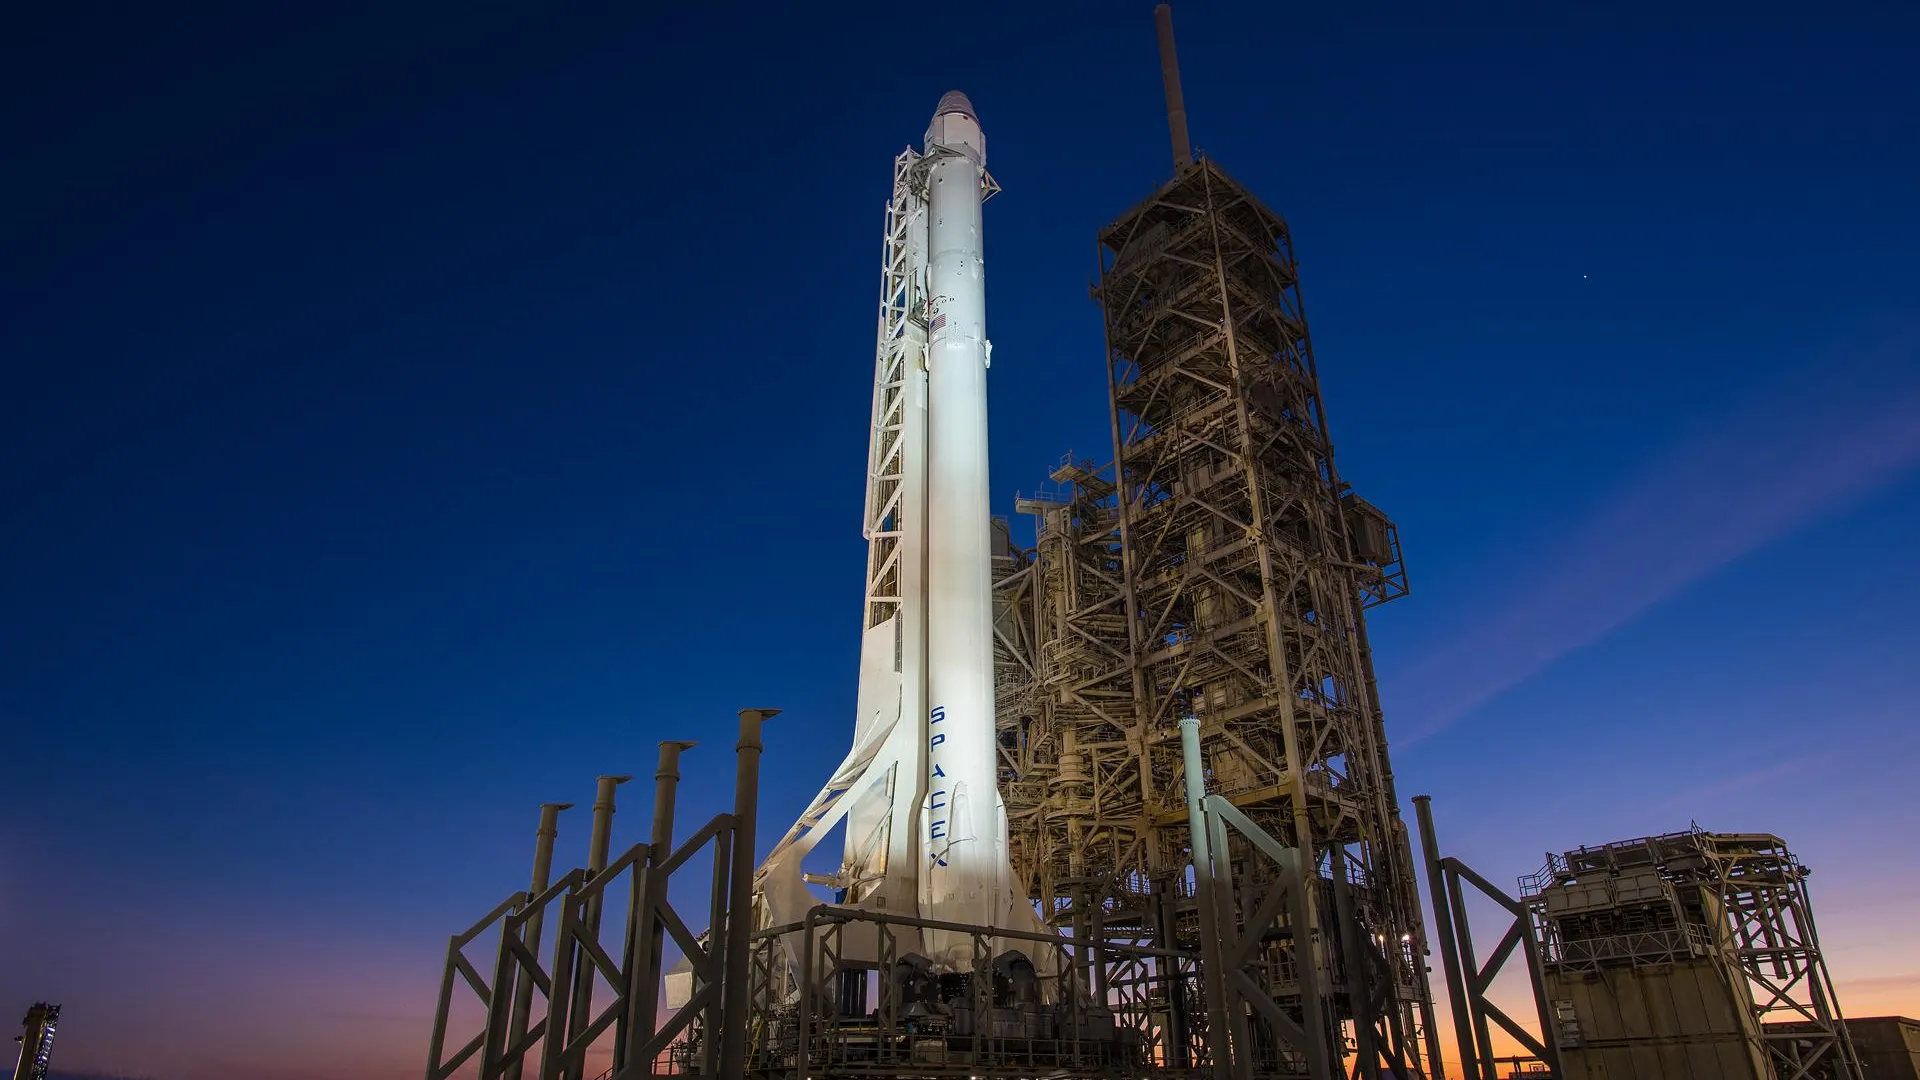 SpaceX. Falcon 9 and Dragon Vertical at Pad 39A, CC0